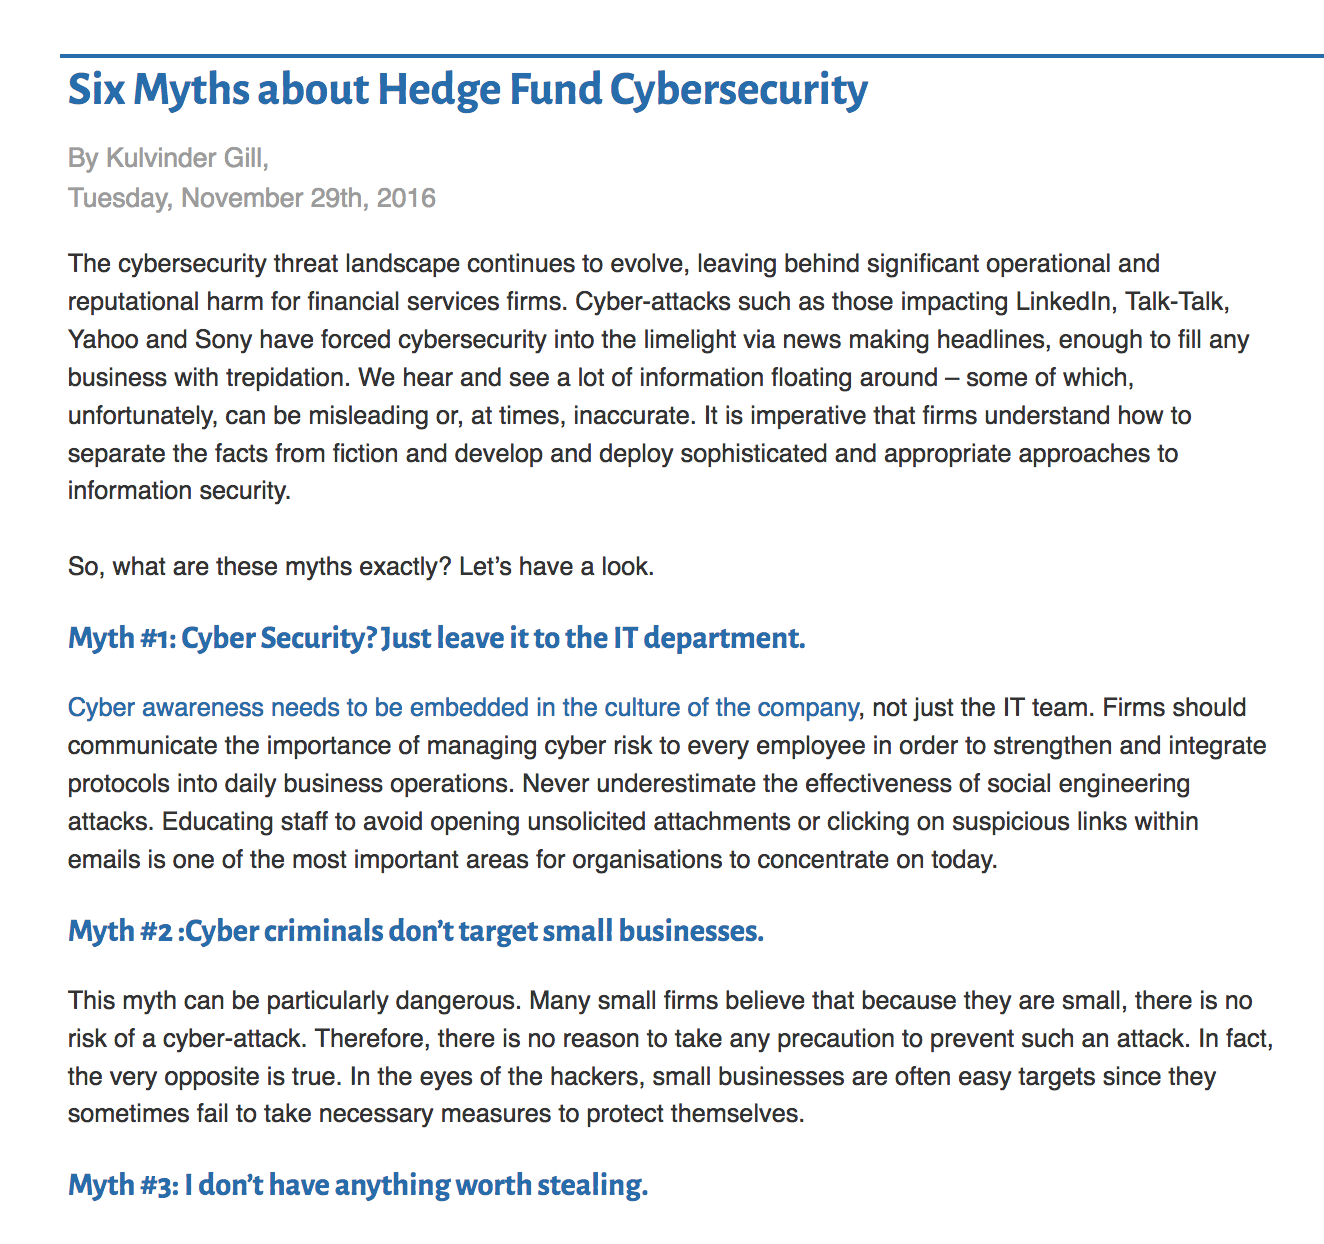 Six Myths about Hedge Fund Cybersecurity